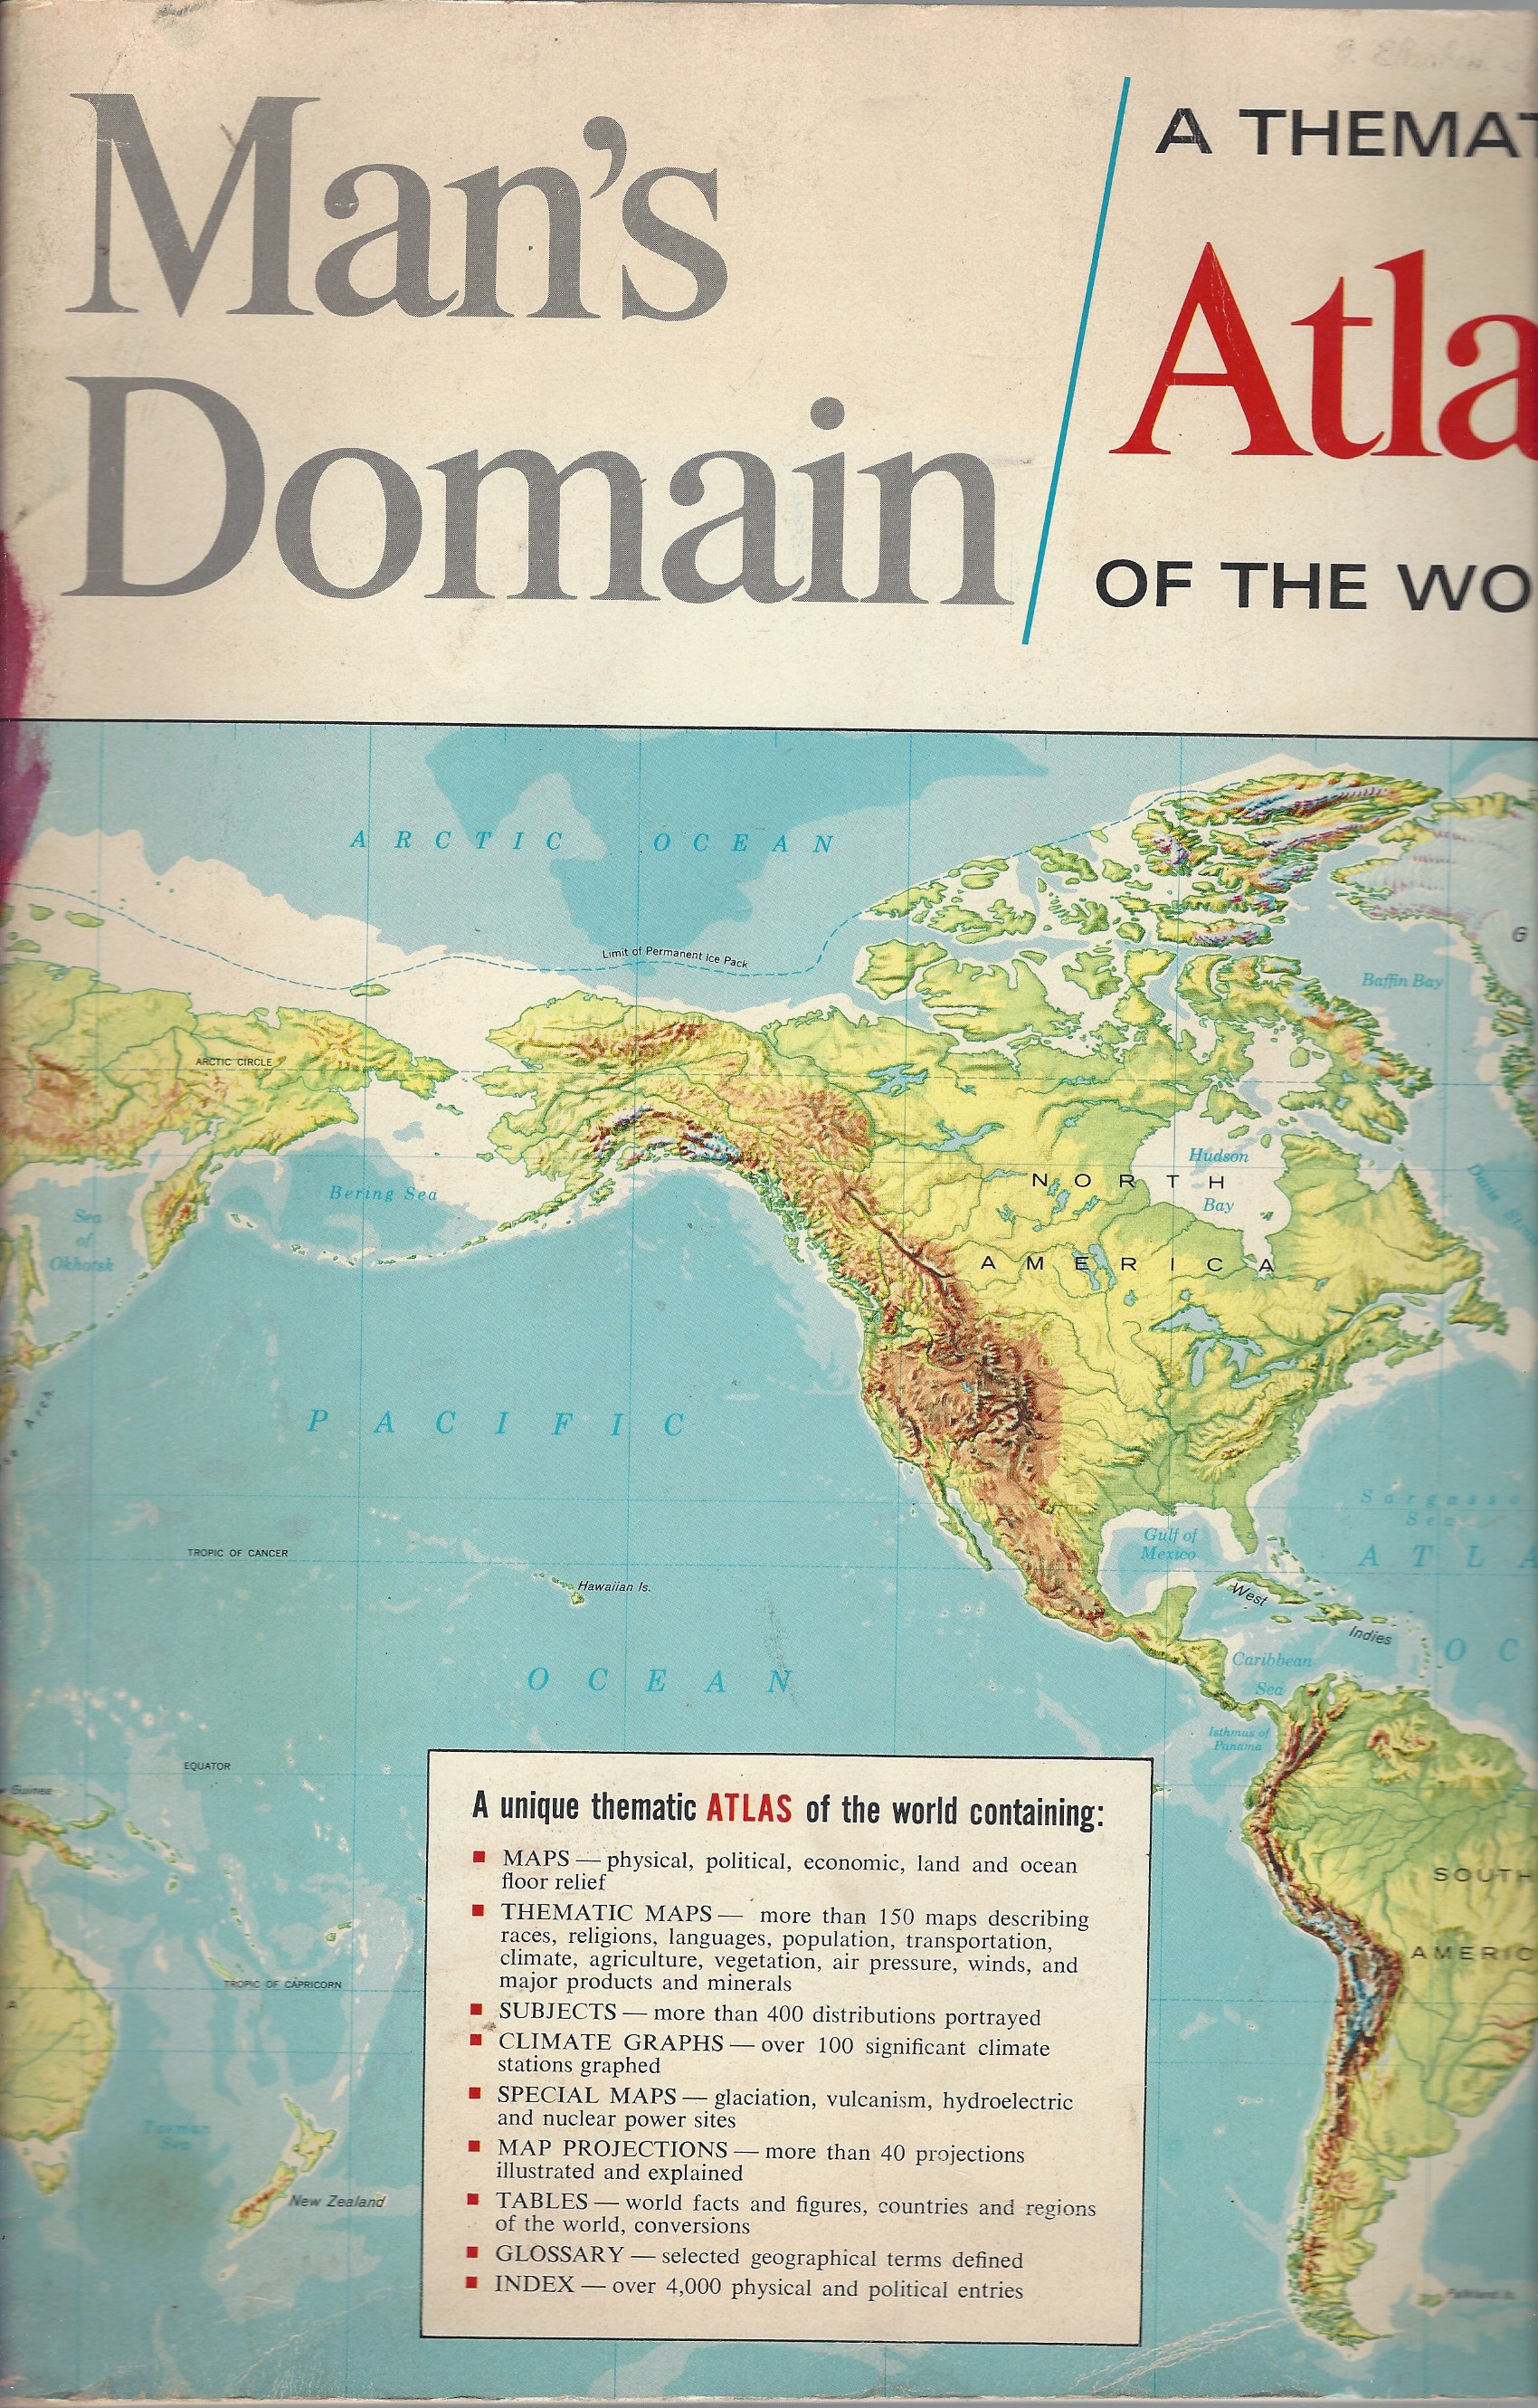 THROWER NORMAN J. W. EDITOR - Man's Domain, a Thematic Atlas of the World